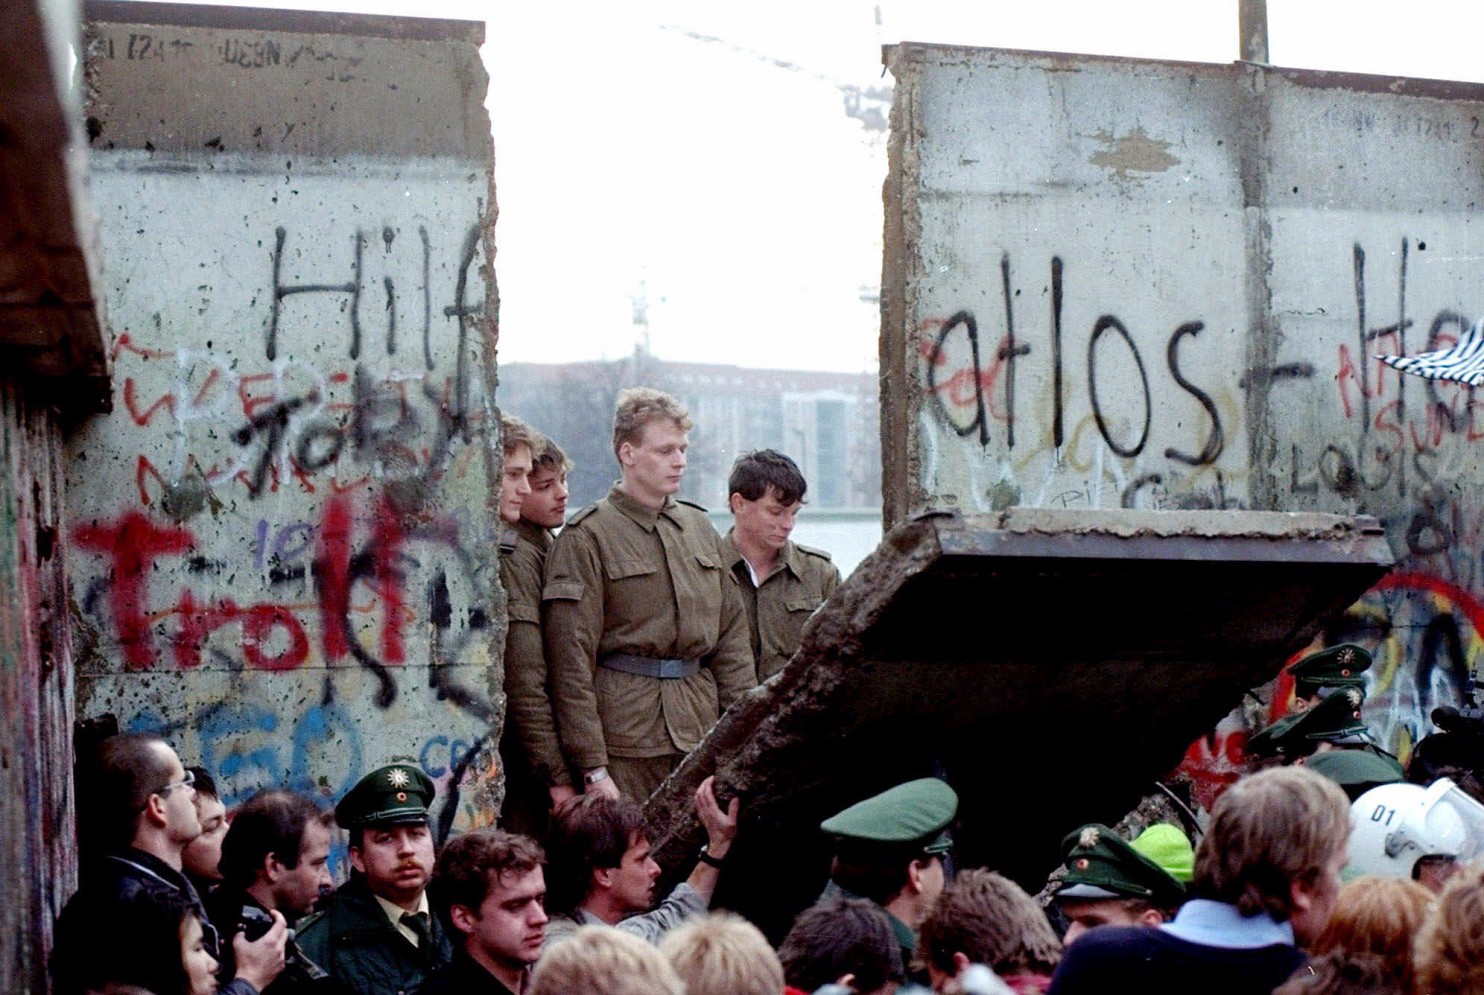 1989 Berlin Wall falls as East Germany lifts travel restrictions